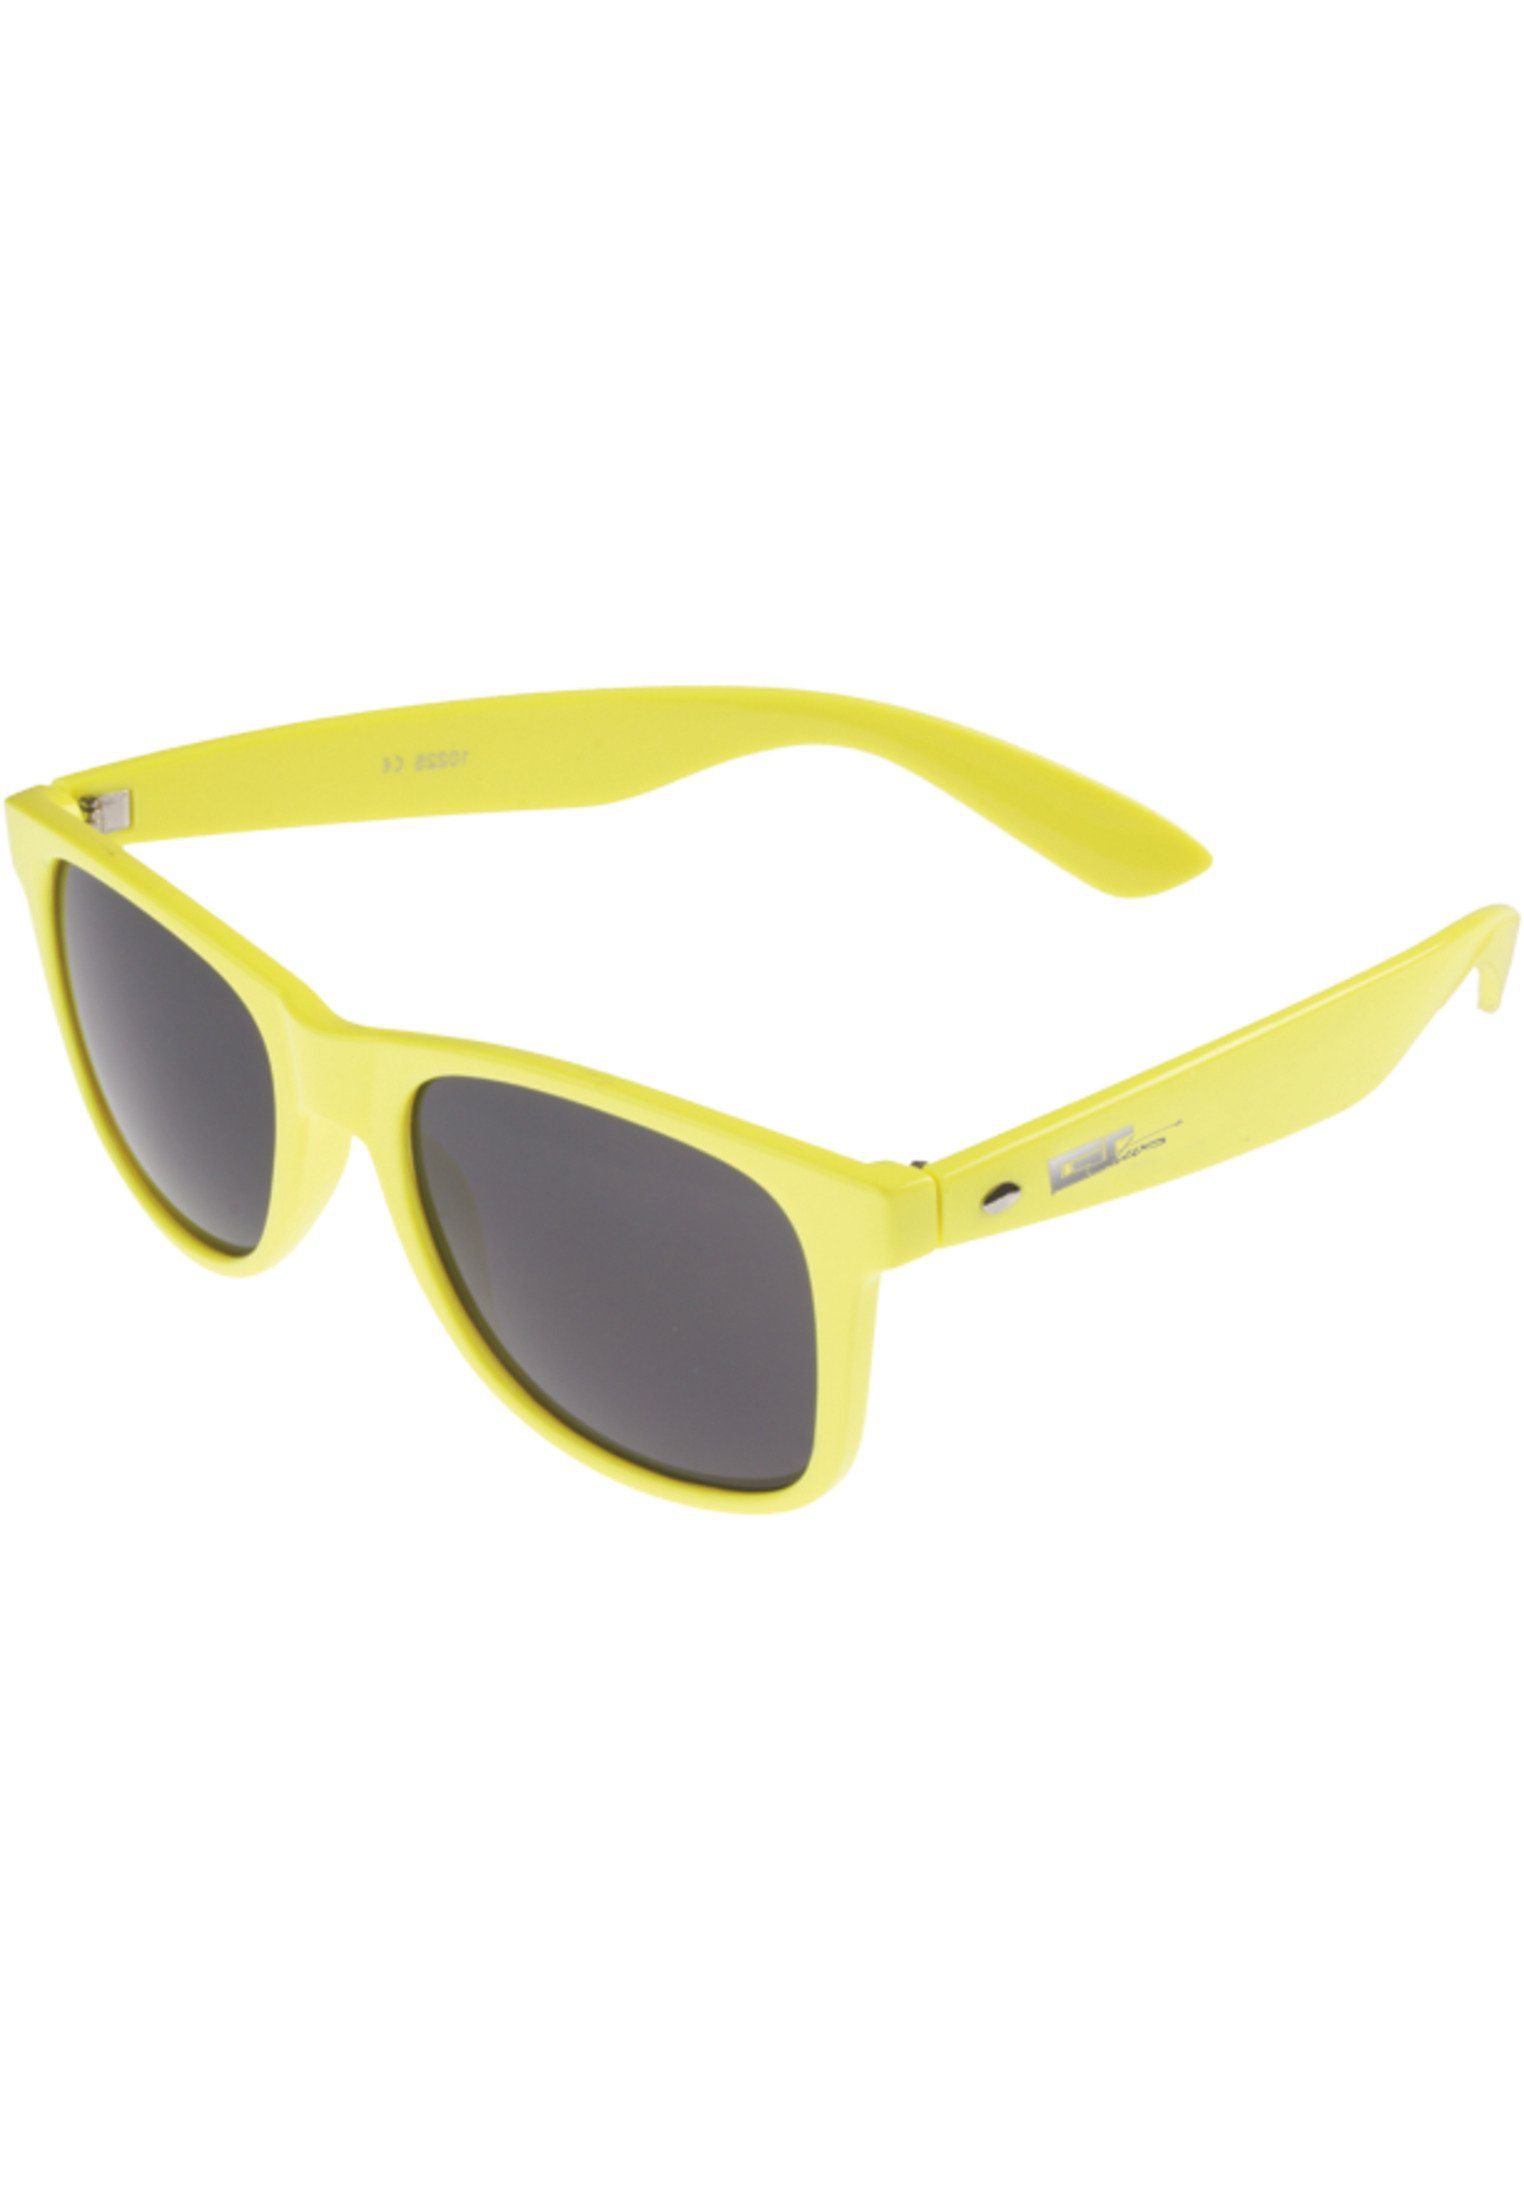 Shades neonyellow MSTRDS Sonnenbrille Groove GStwo Accessoires